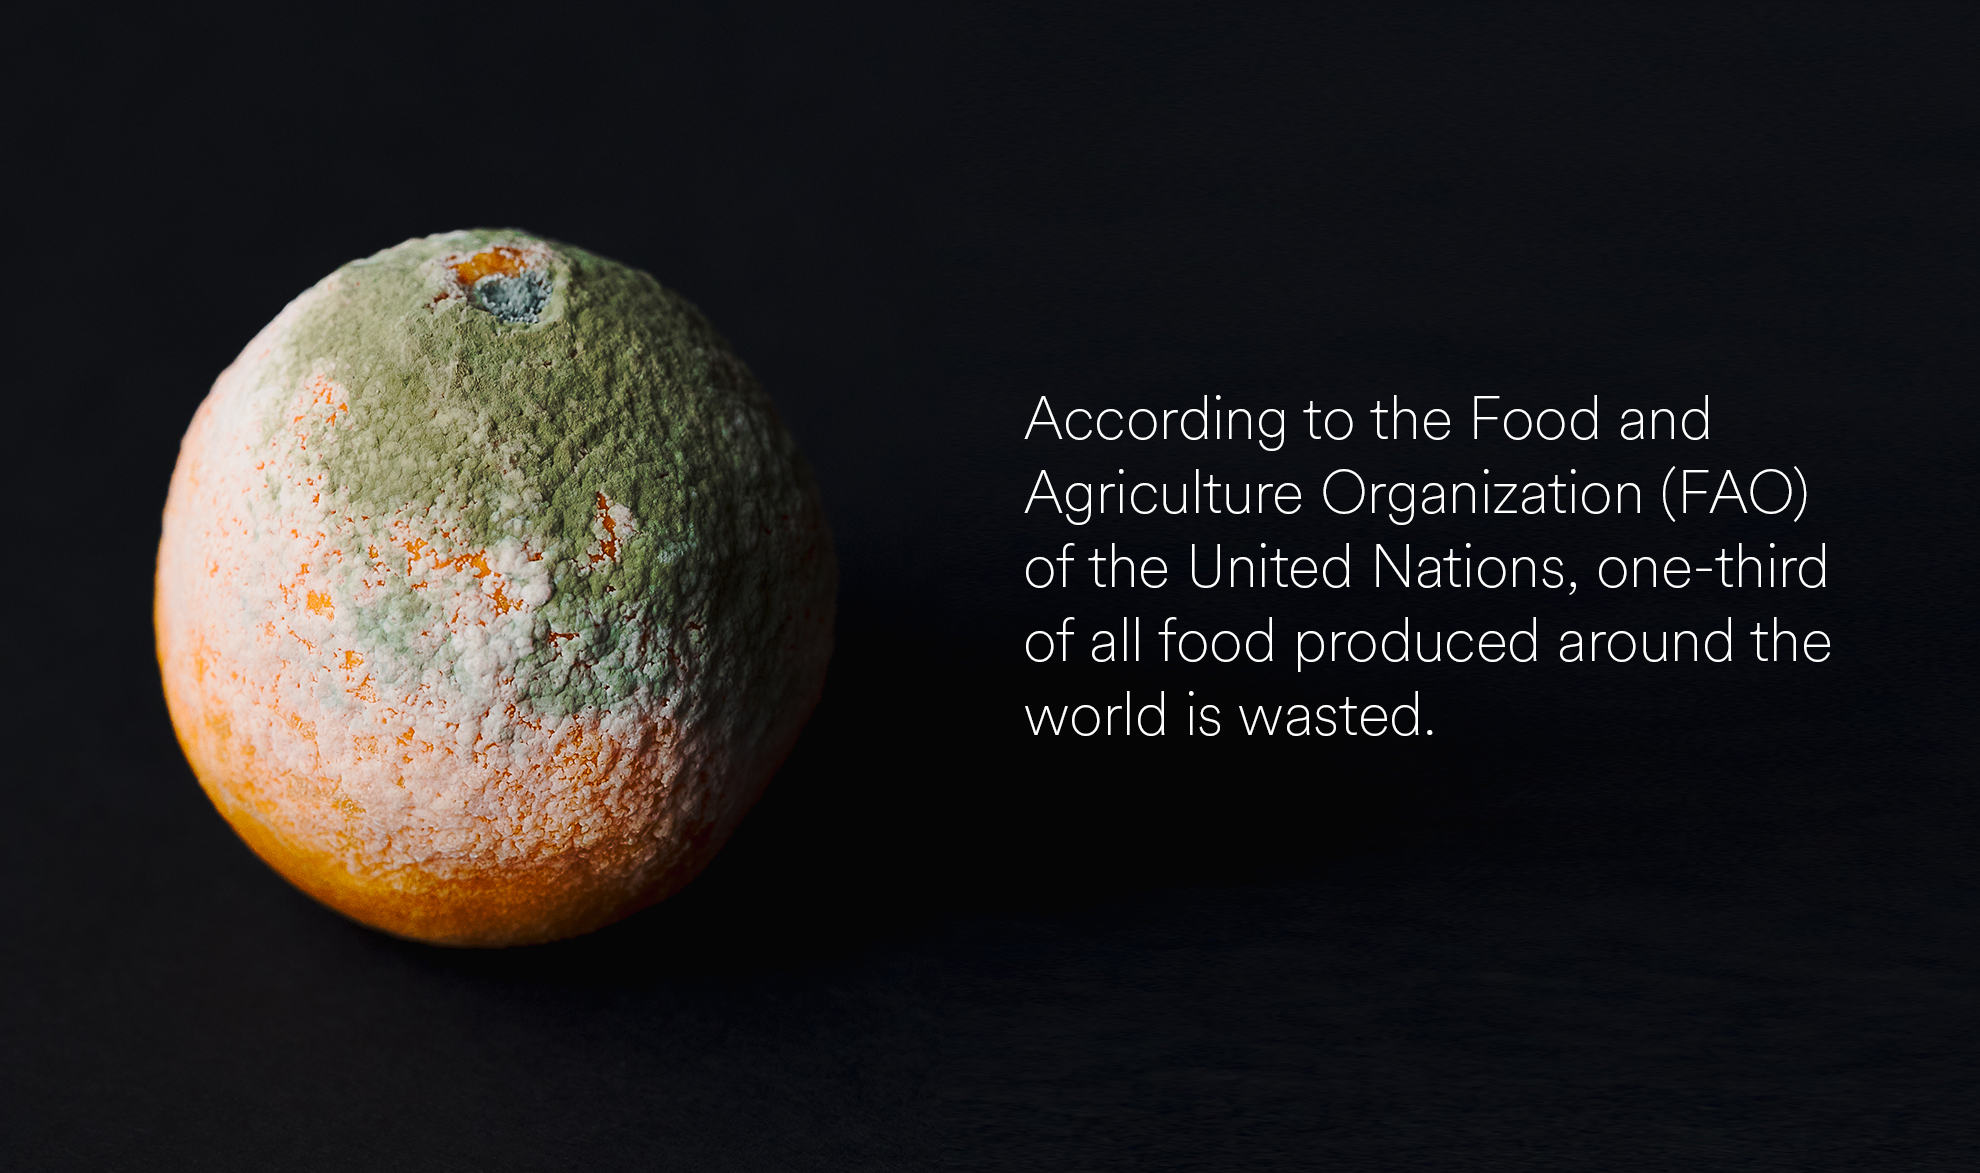 UN Stats of global food waste